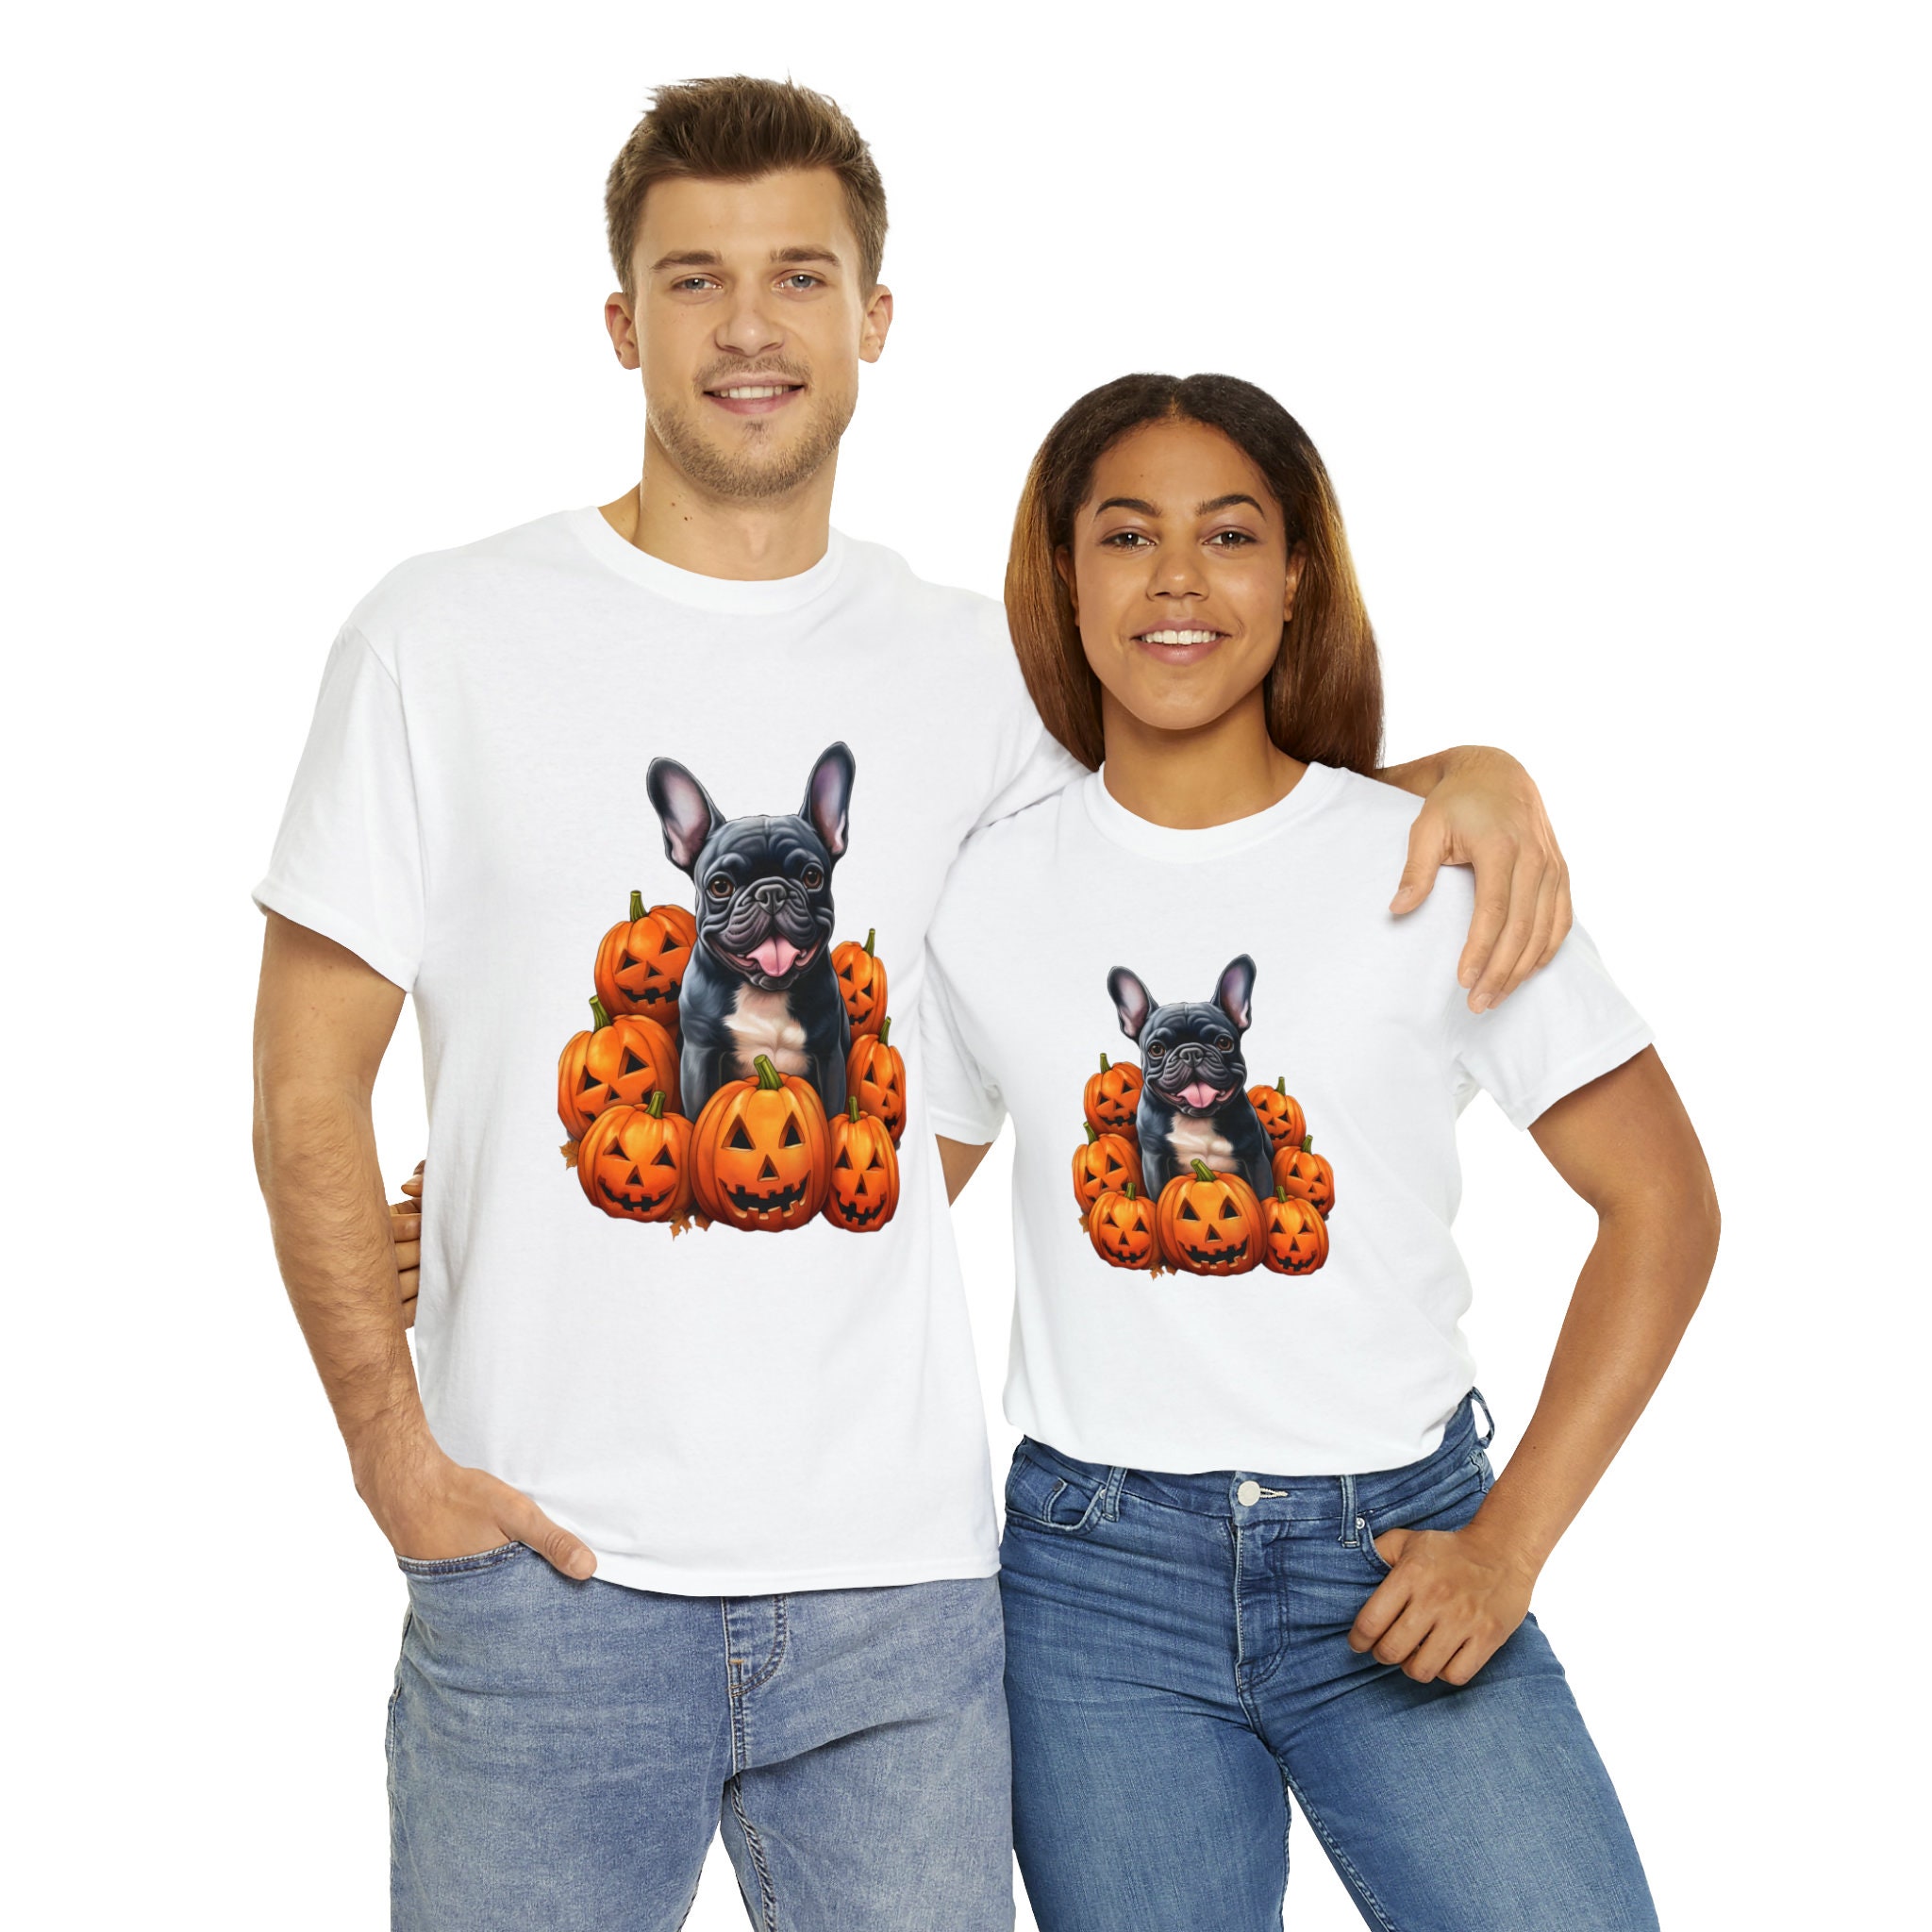 Discover Unisex Funny Halloween French Bulldog T shirt  Loose Fit Mens Silly Humor Tshirt  Womens Dog Funny Frenchie Tee  Cute Pumpkin Scary Top